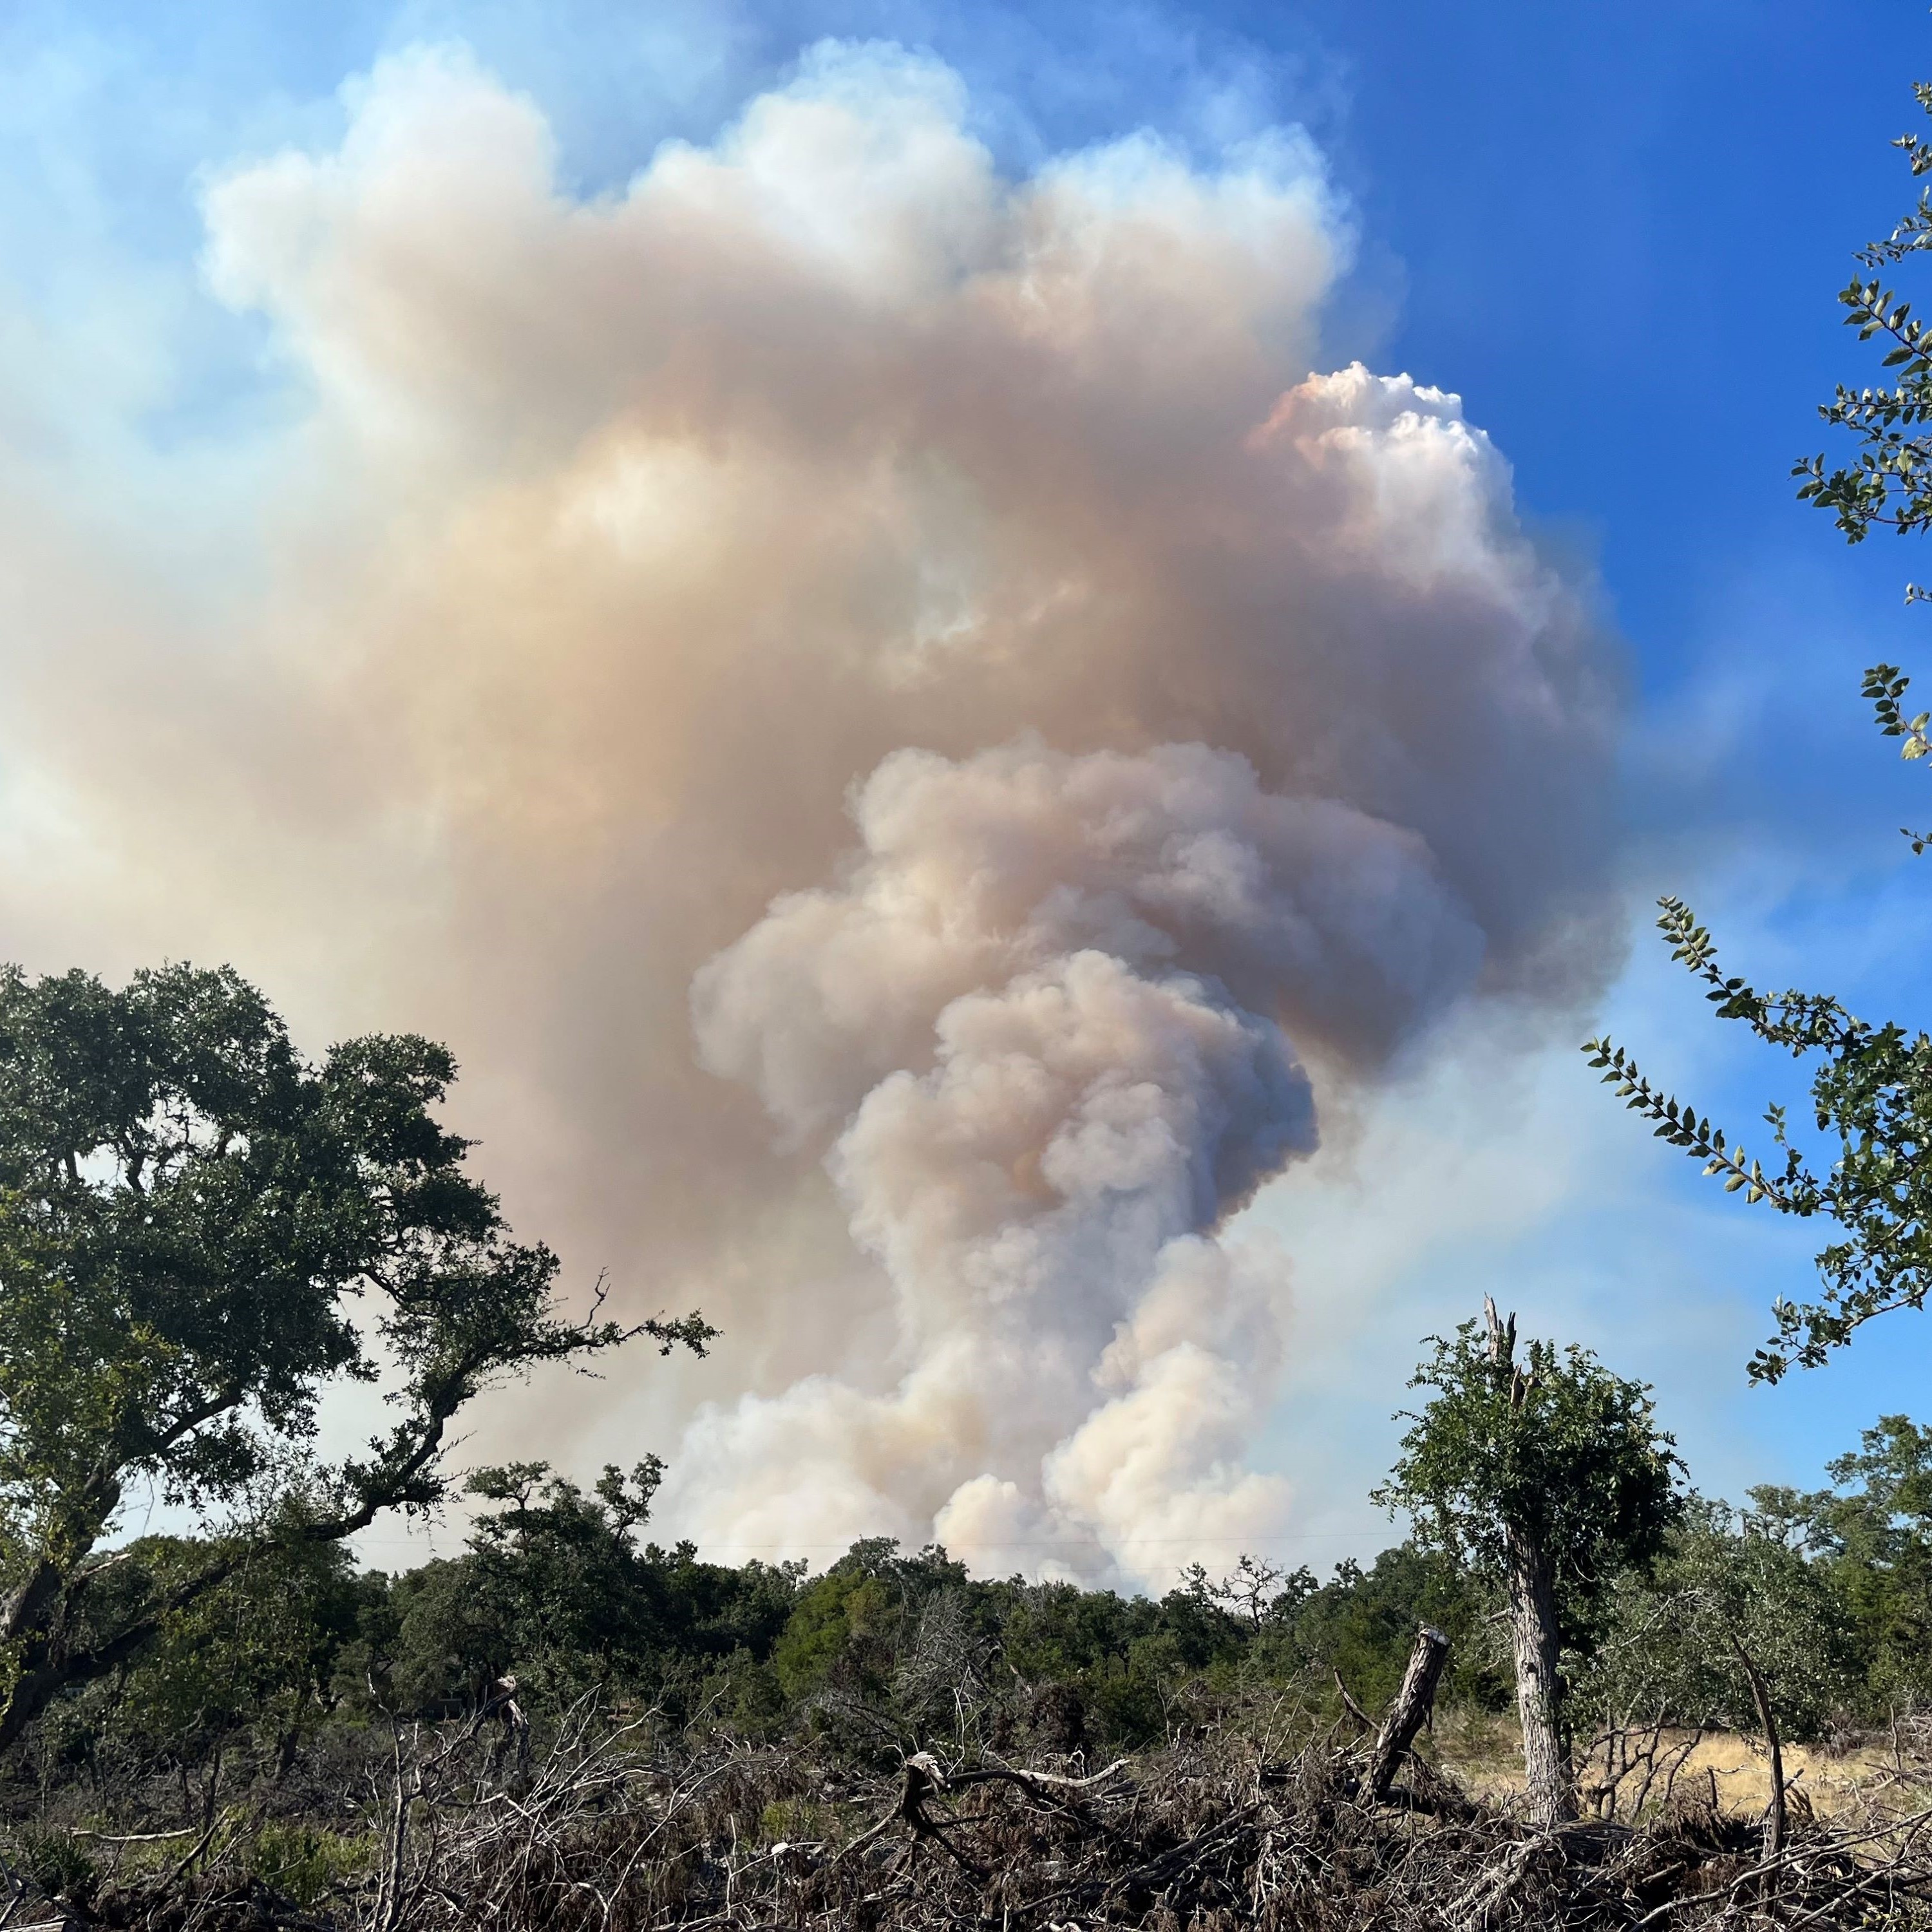 Texas A&M Forest Service has raised the State Wildfire Preparedness Level to Level 4 due to the recent increase in wildfire activity across the state and the growing potential for wildfires to become more severe, making them harder to control.